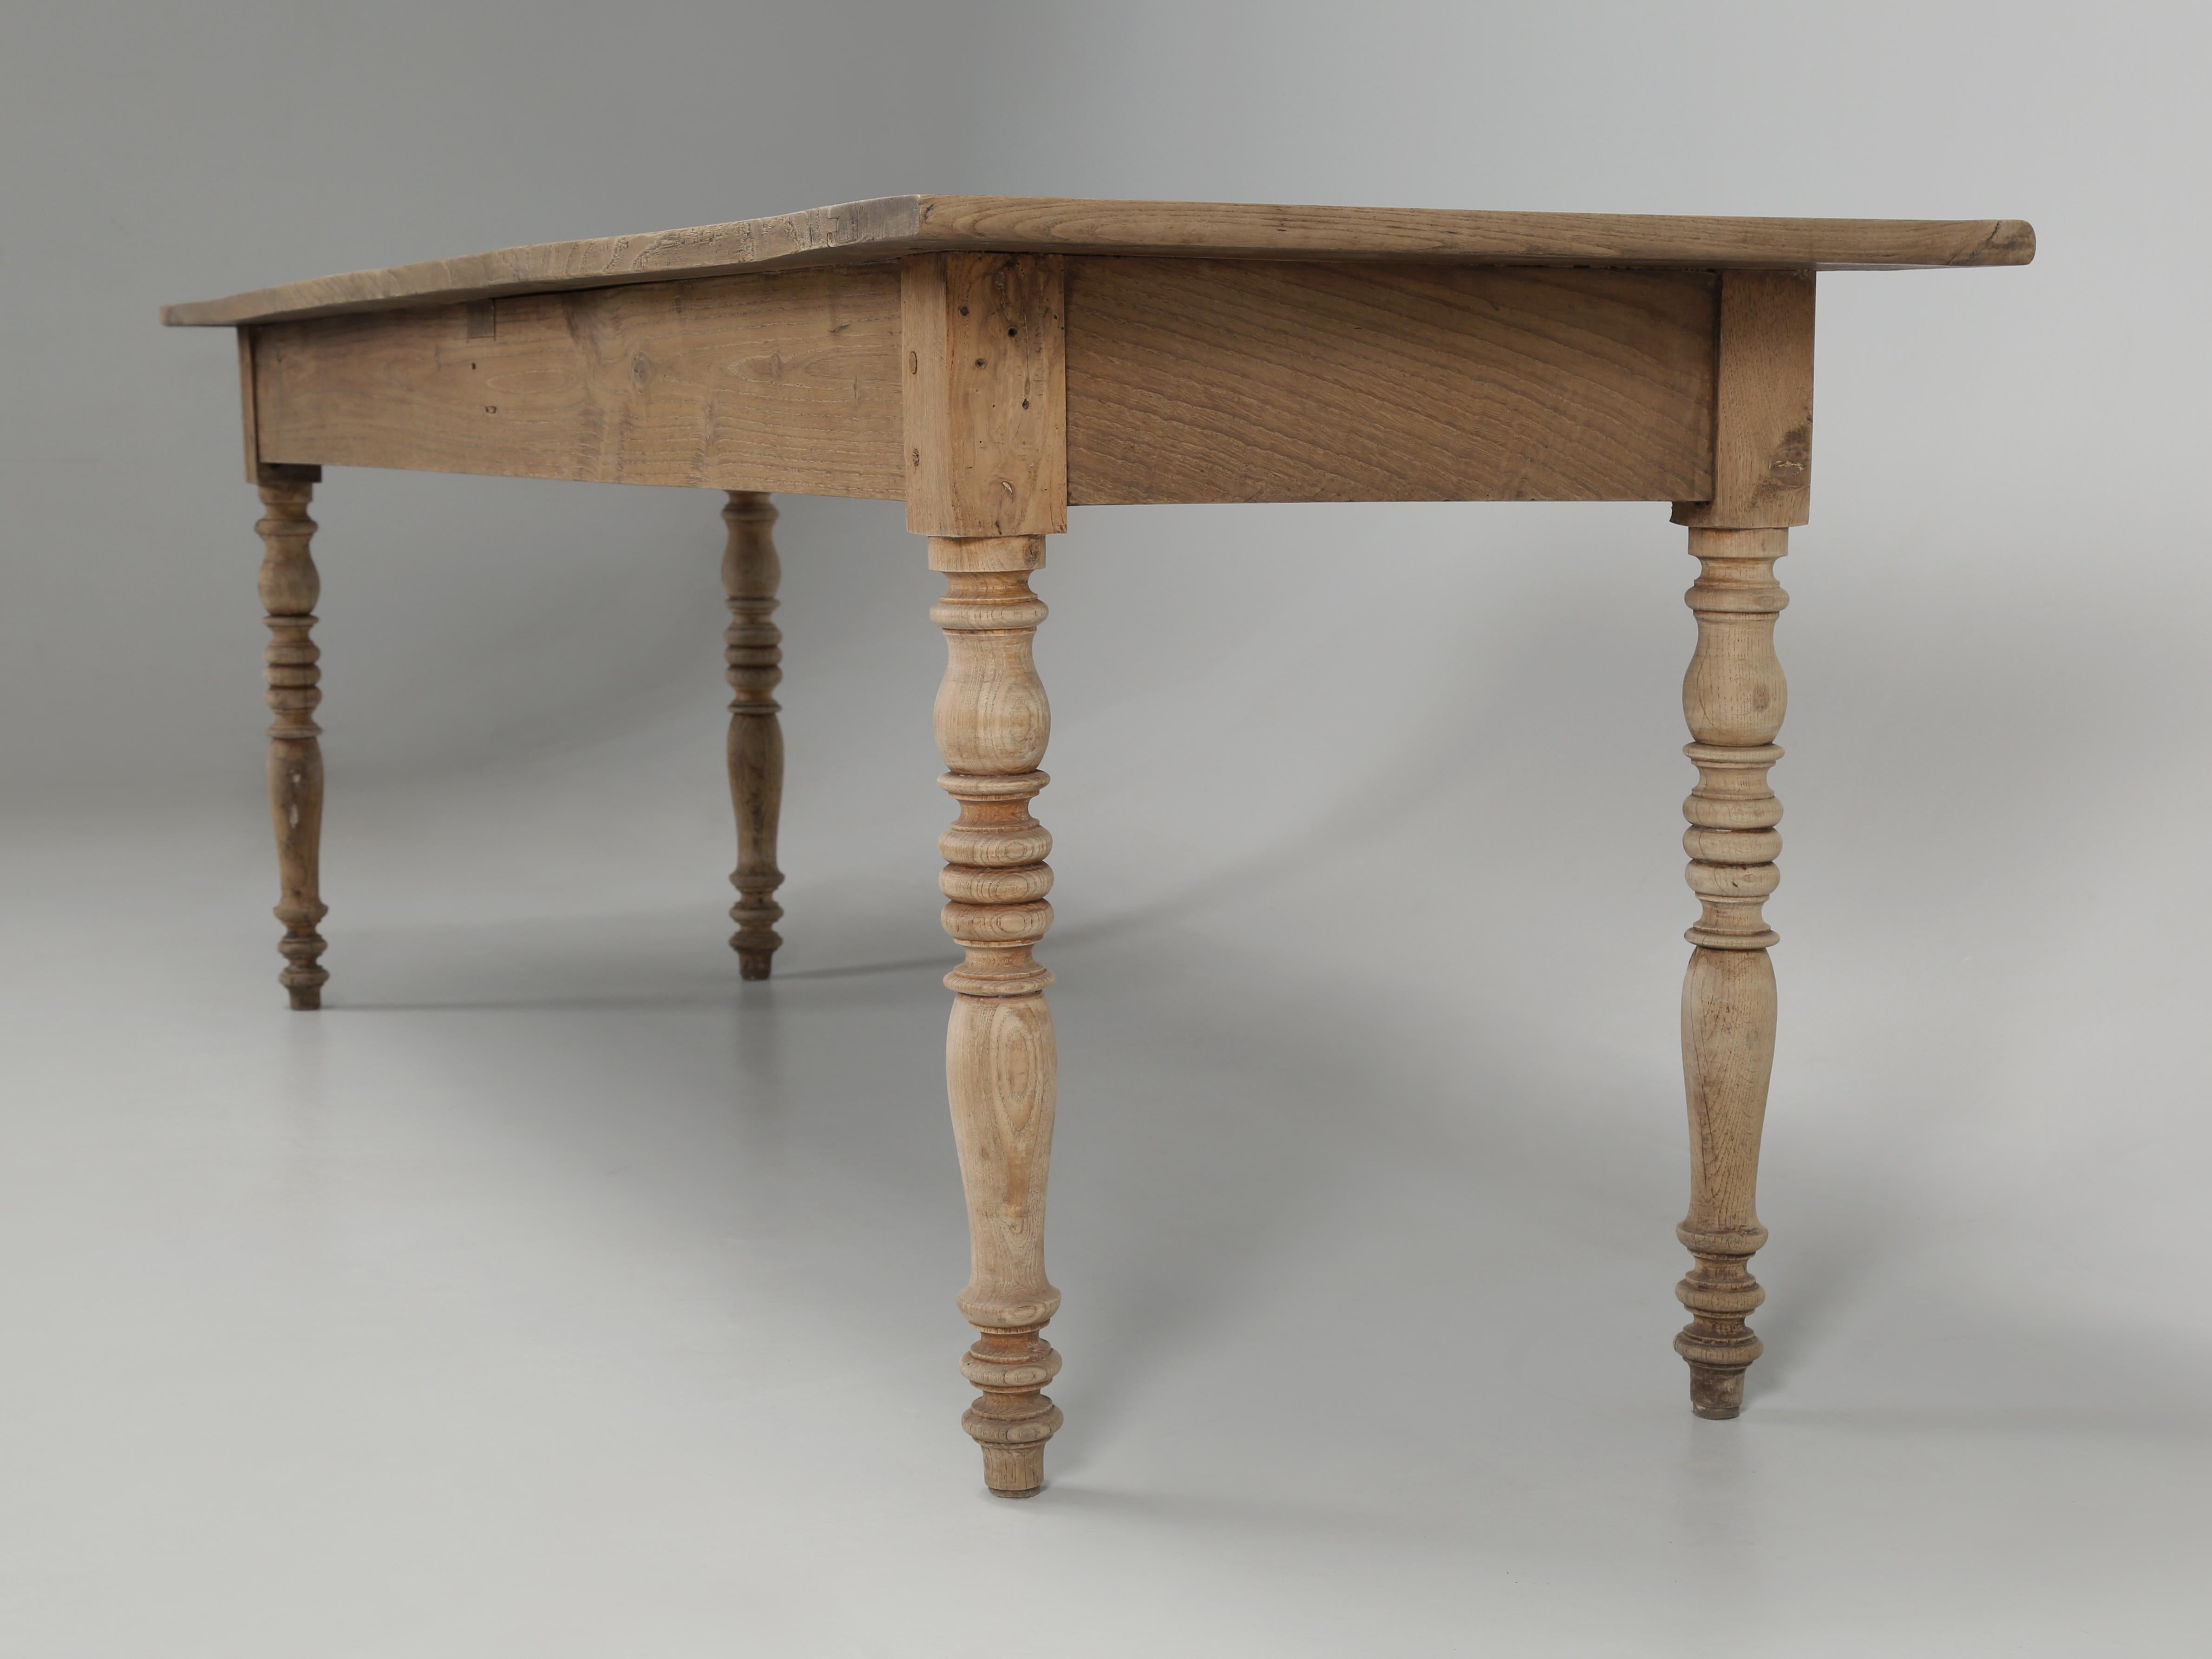 Antique French farm table dating from the 1800s. This antique French white oak farm table could be older based on the height and before we go and raise the height to modern standards, we thought we’d wait to see what the client would prefer. Antique